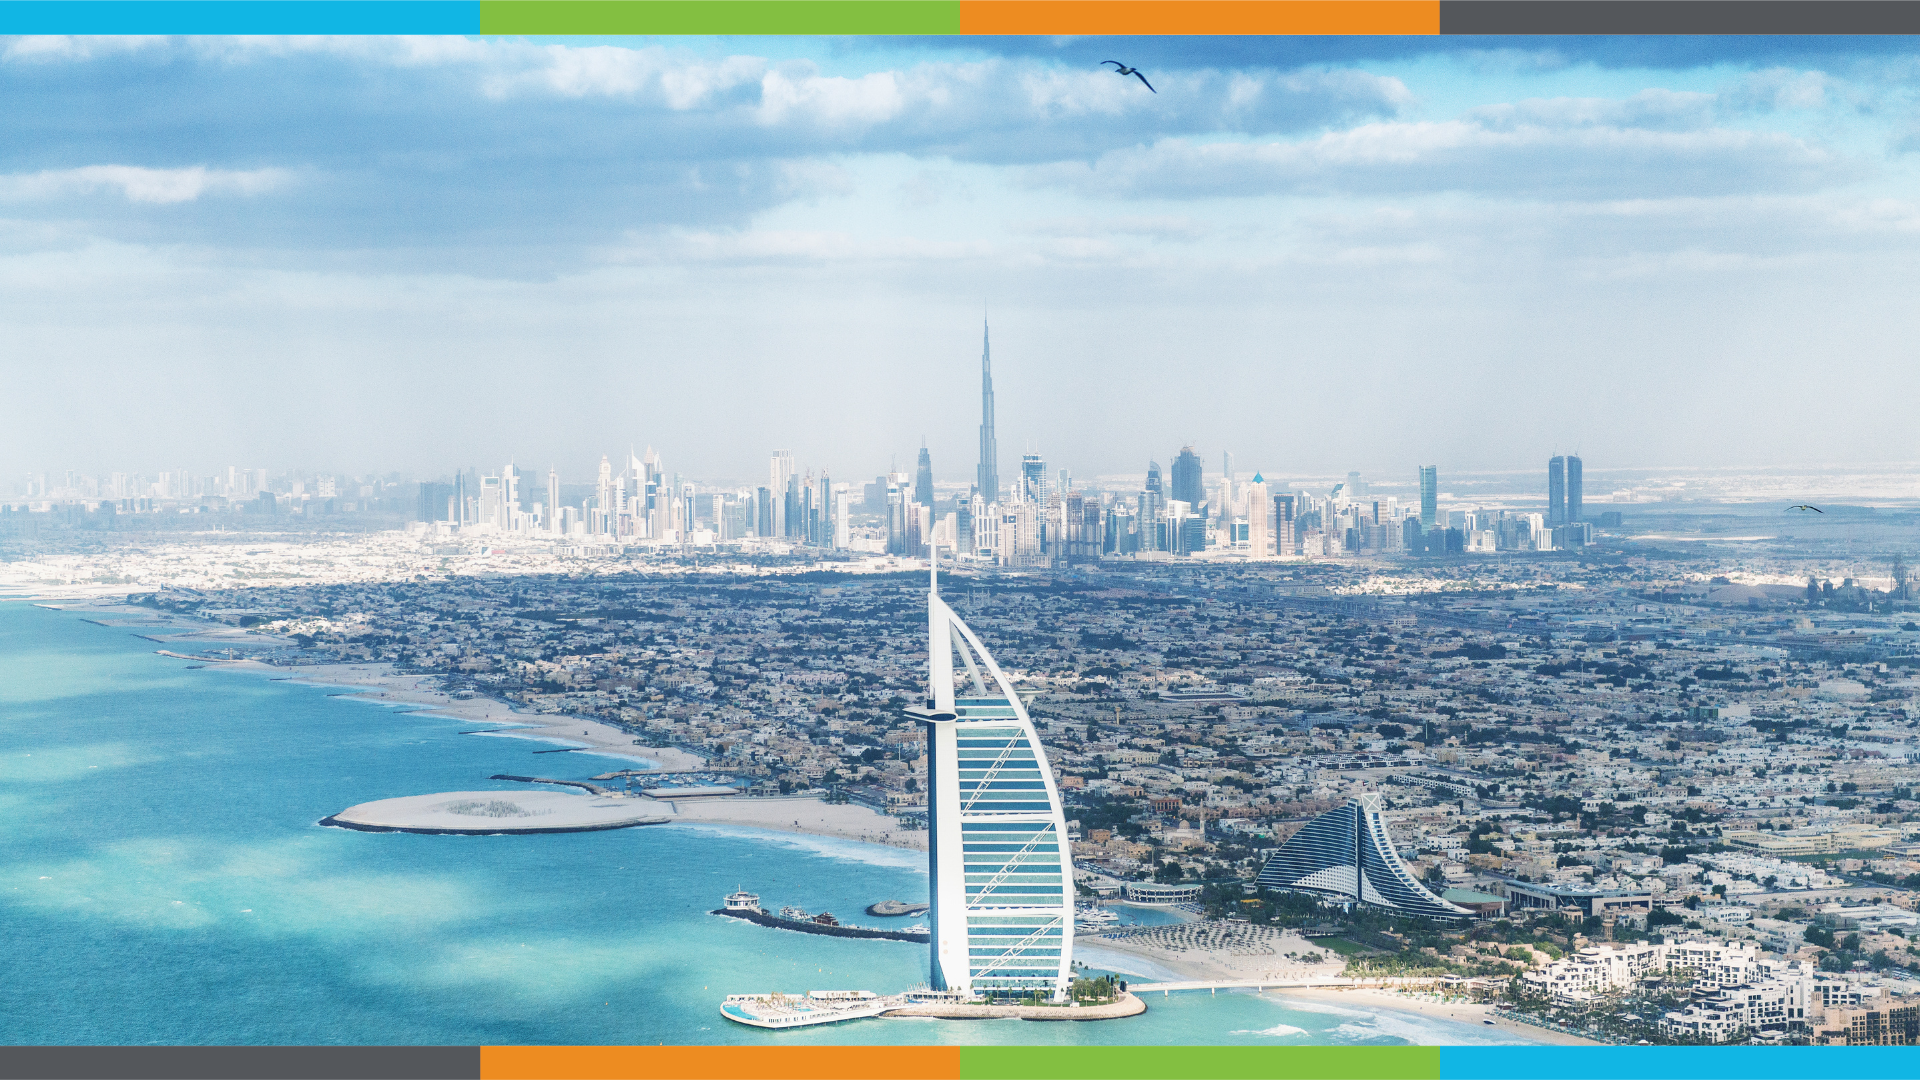 The coast of Dubai, nestled against cerulean waters, on a beautiful day. Some clouds create a haze high in the sky. A border of Circular Innovation Council's brand colours runs along the top and bottom.